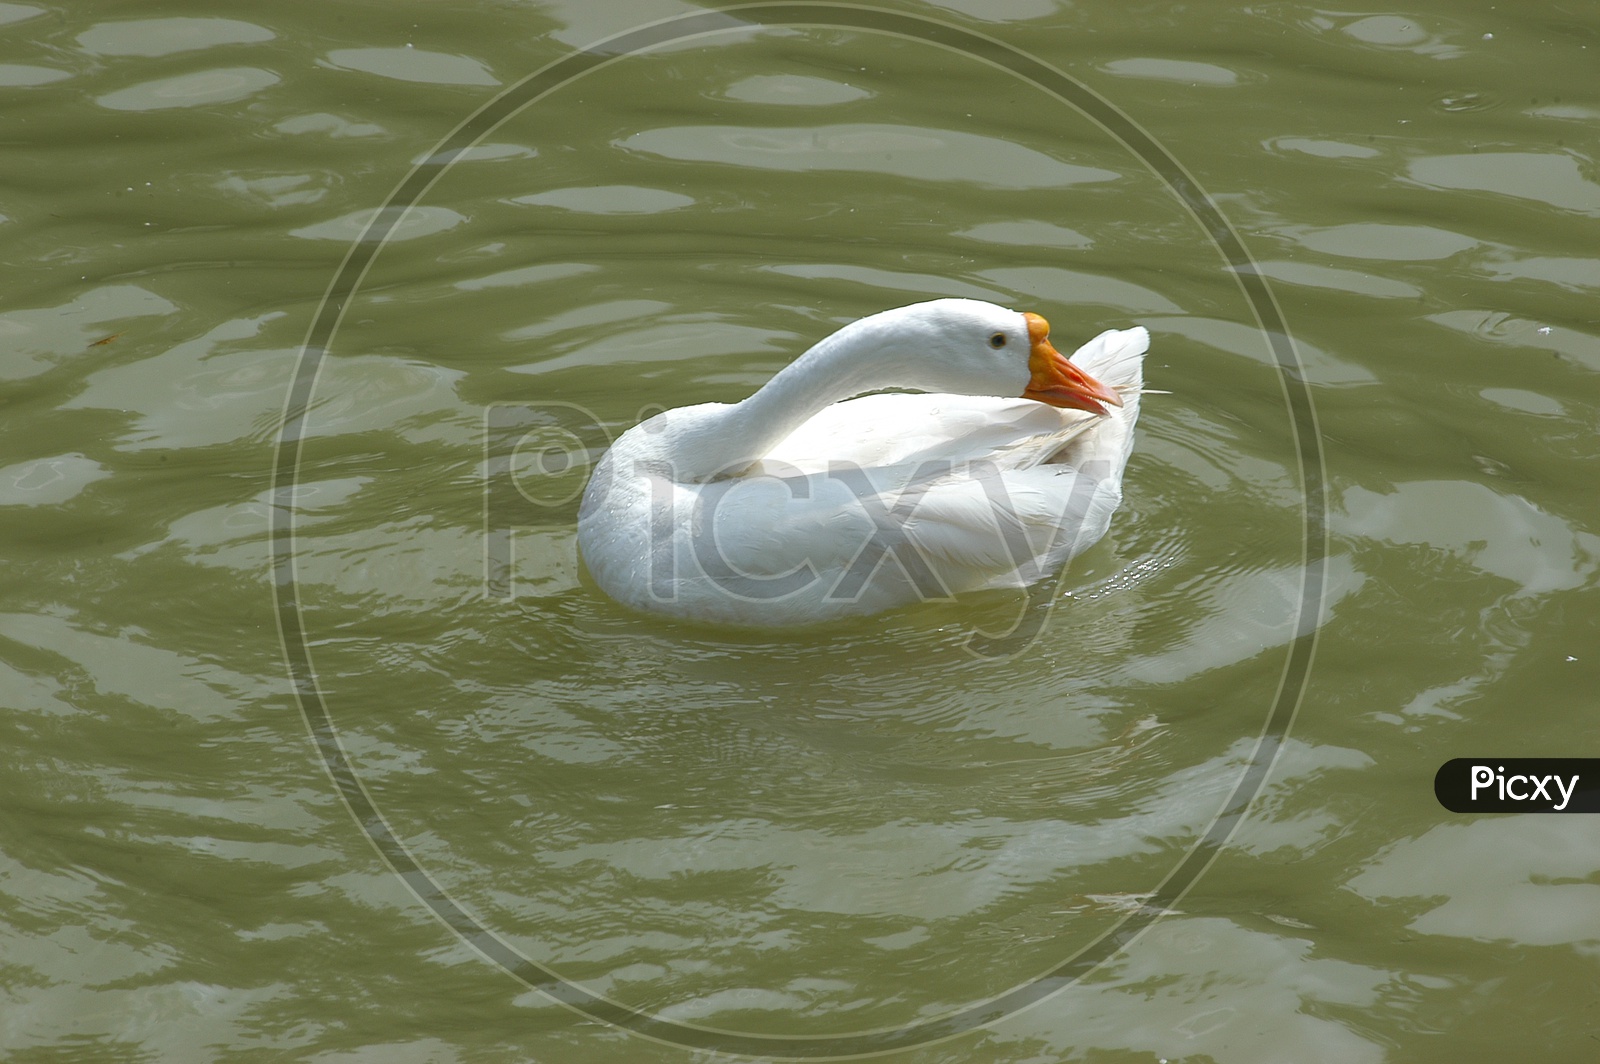 A Duck with its neck turned side wards on the water